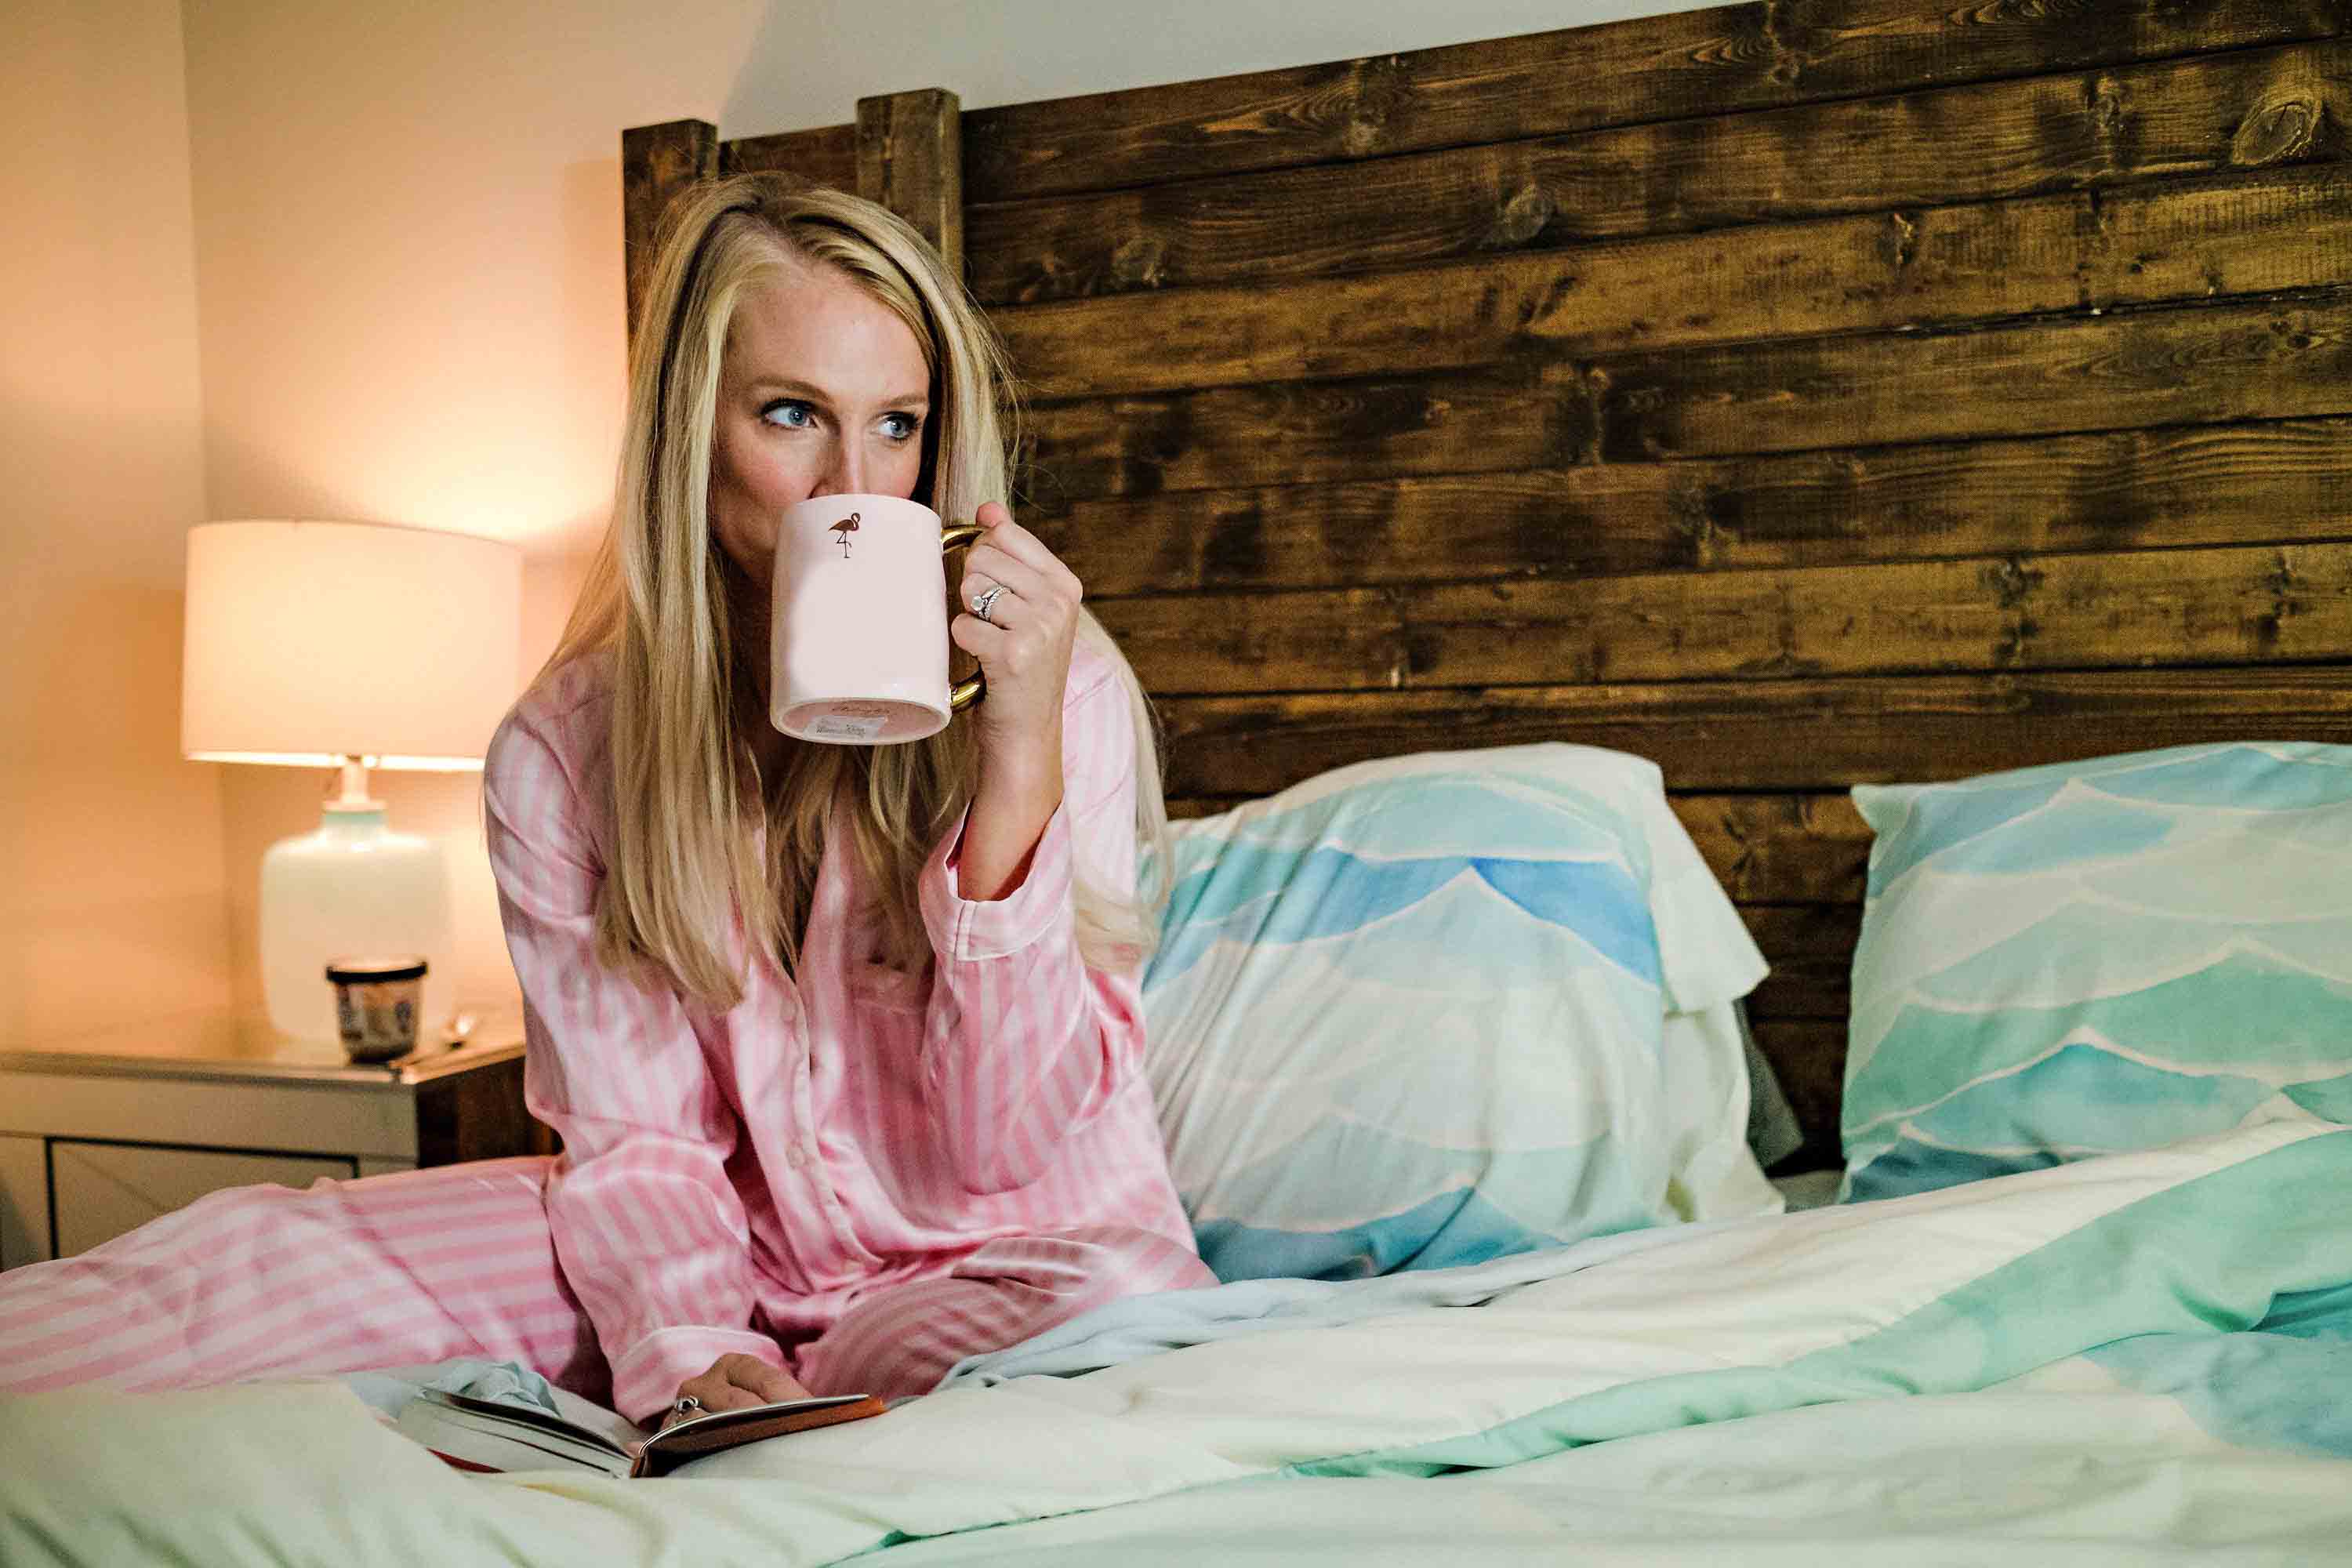 5 Tips For A Successful Nighttime Routine by Houston lifestyle blogger Happily Hughes